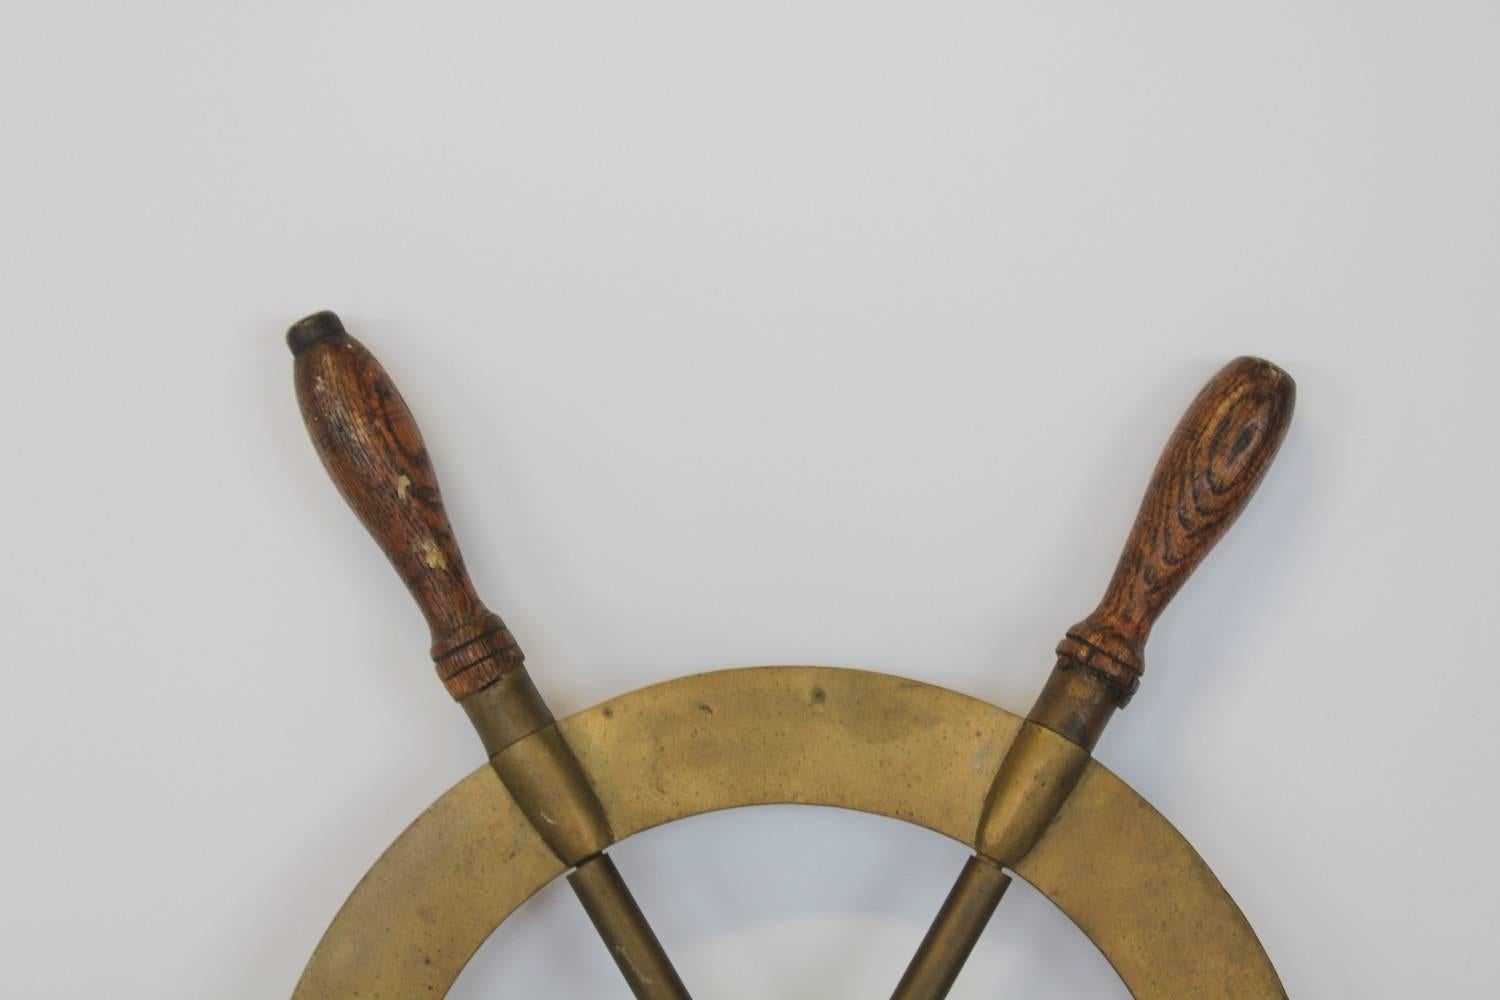 Antique brass boat ship steering wheel with wooden handles.